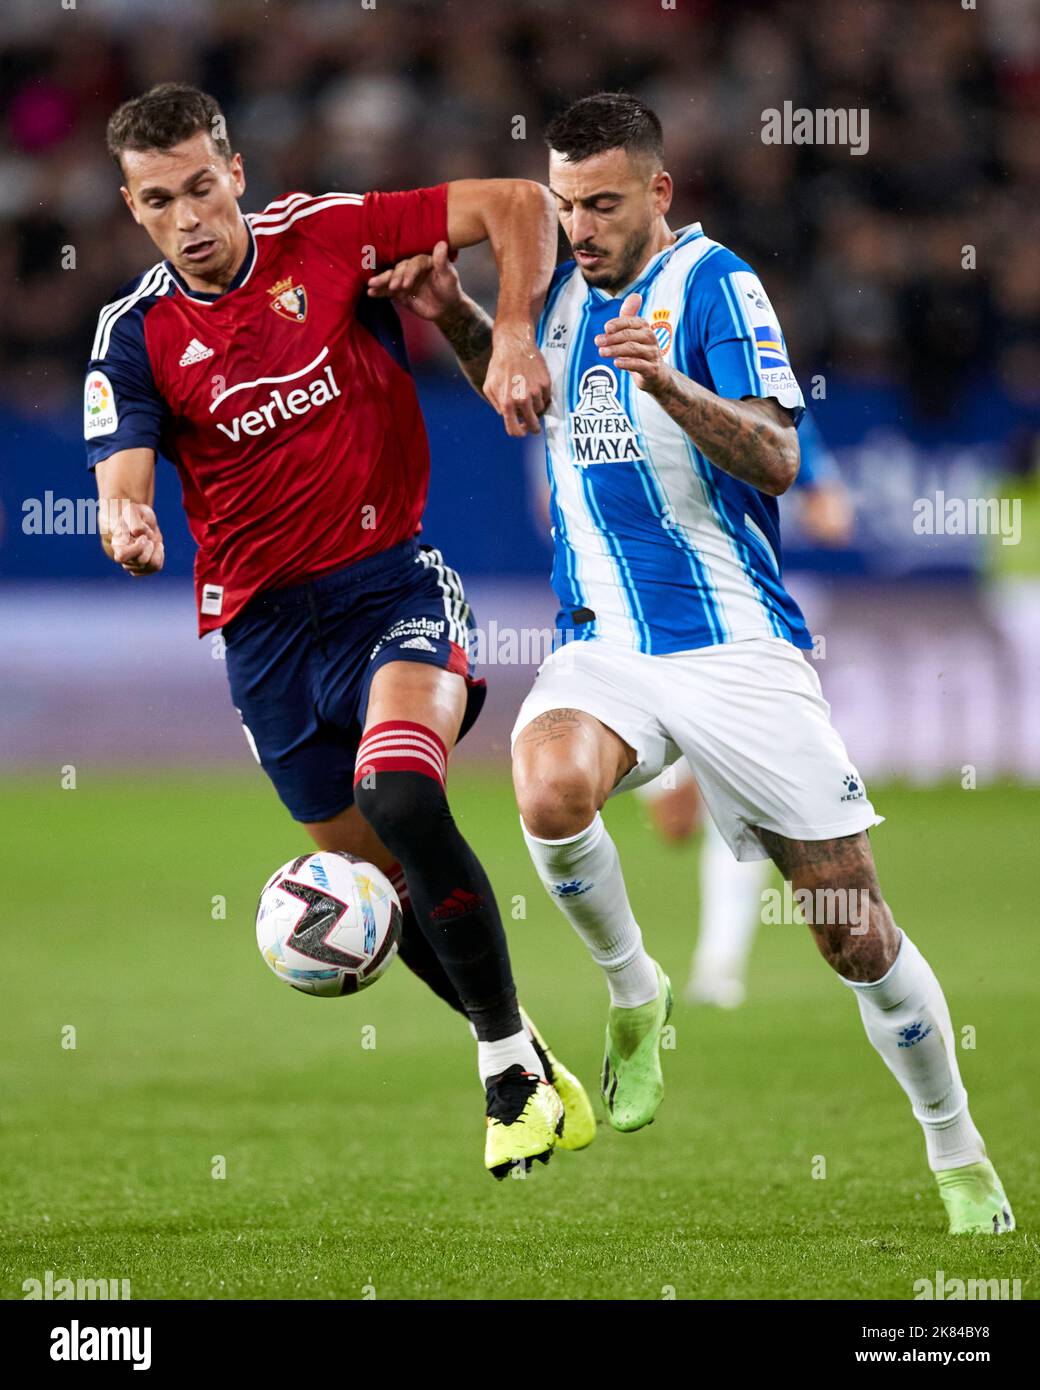 Pamplona, Spain. 20th Oct, 2022. PAMPLONA, SPAIN - OCTOBER 20: Joselu Mato of RCD Espanyol competes for the ball with Lucas Torro of CA Osasuna during the La Liga Santander match between CA Osasuna and RCD Espanyol on October 20, 2022 at El Sadar in Pamplona, Spain. (Photo by Ricardo Larreina/AFLO) Credit: Aflo Co. Ltd./Alamy Live News Stock Photo